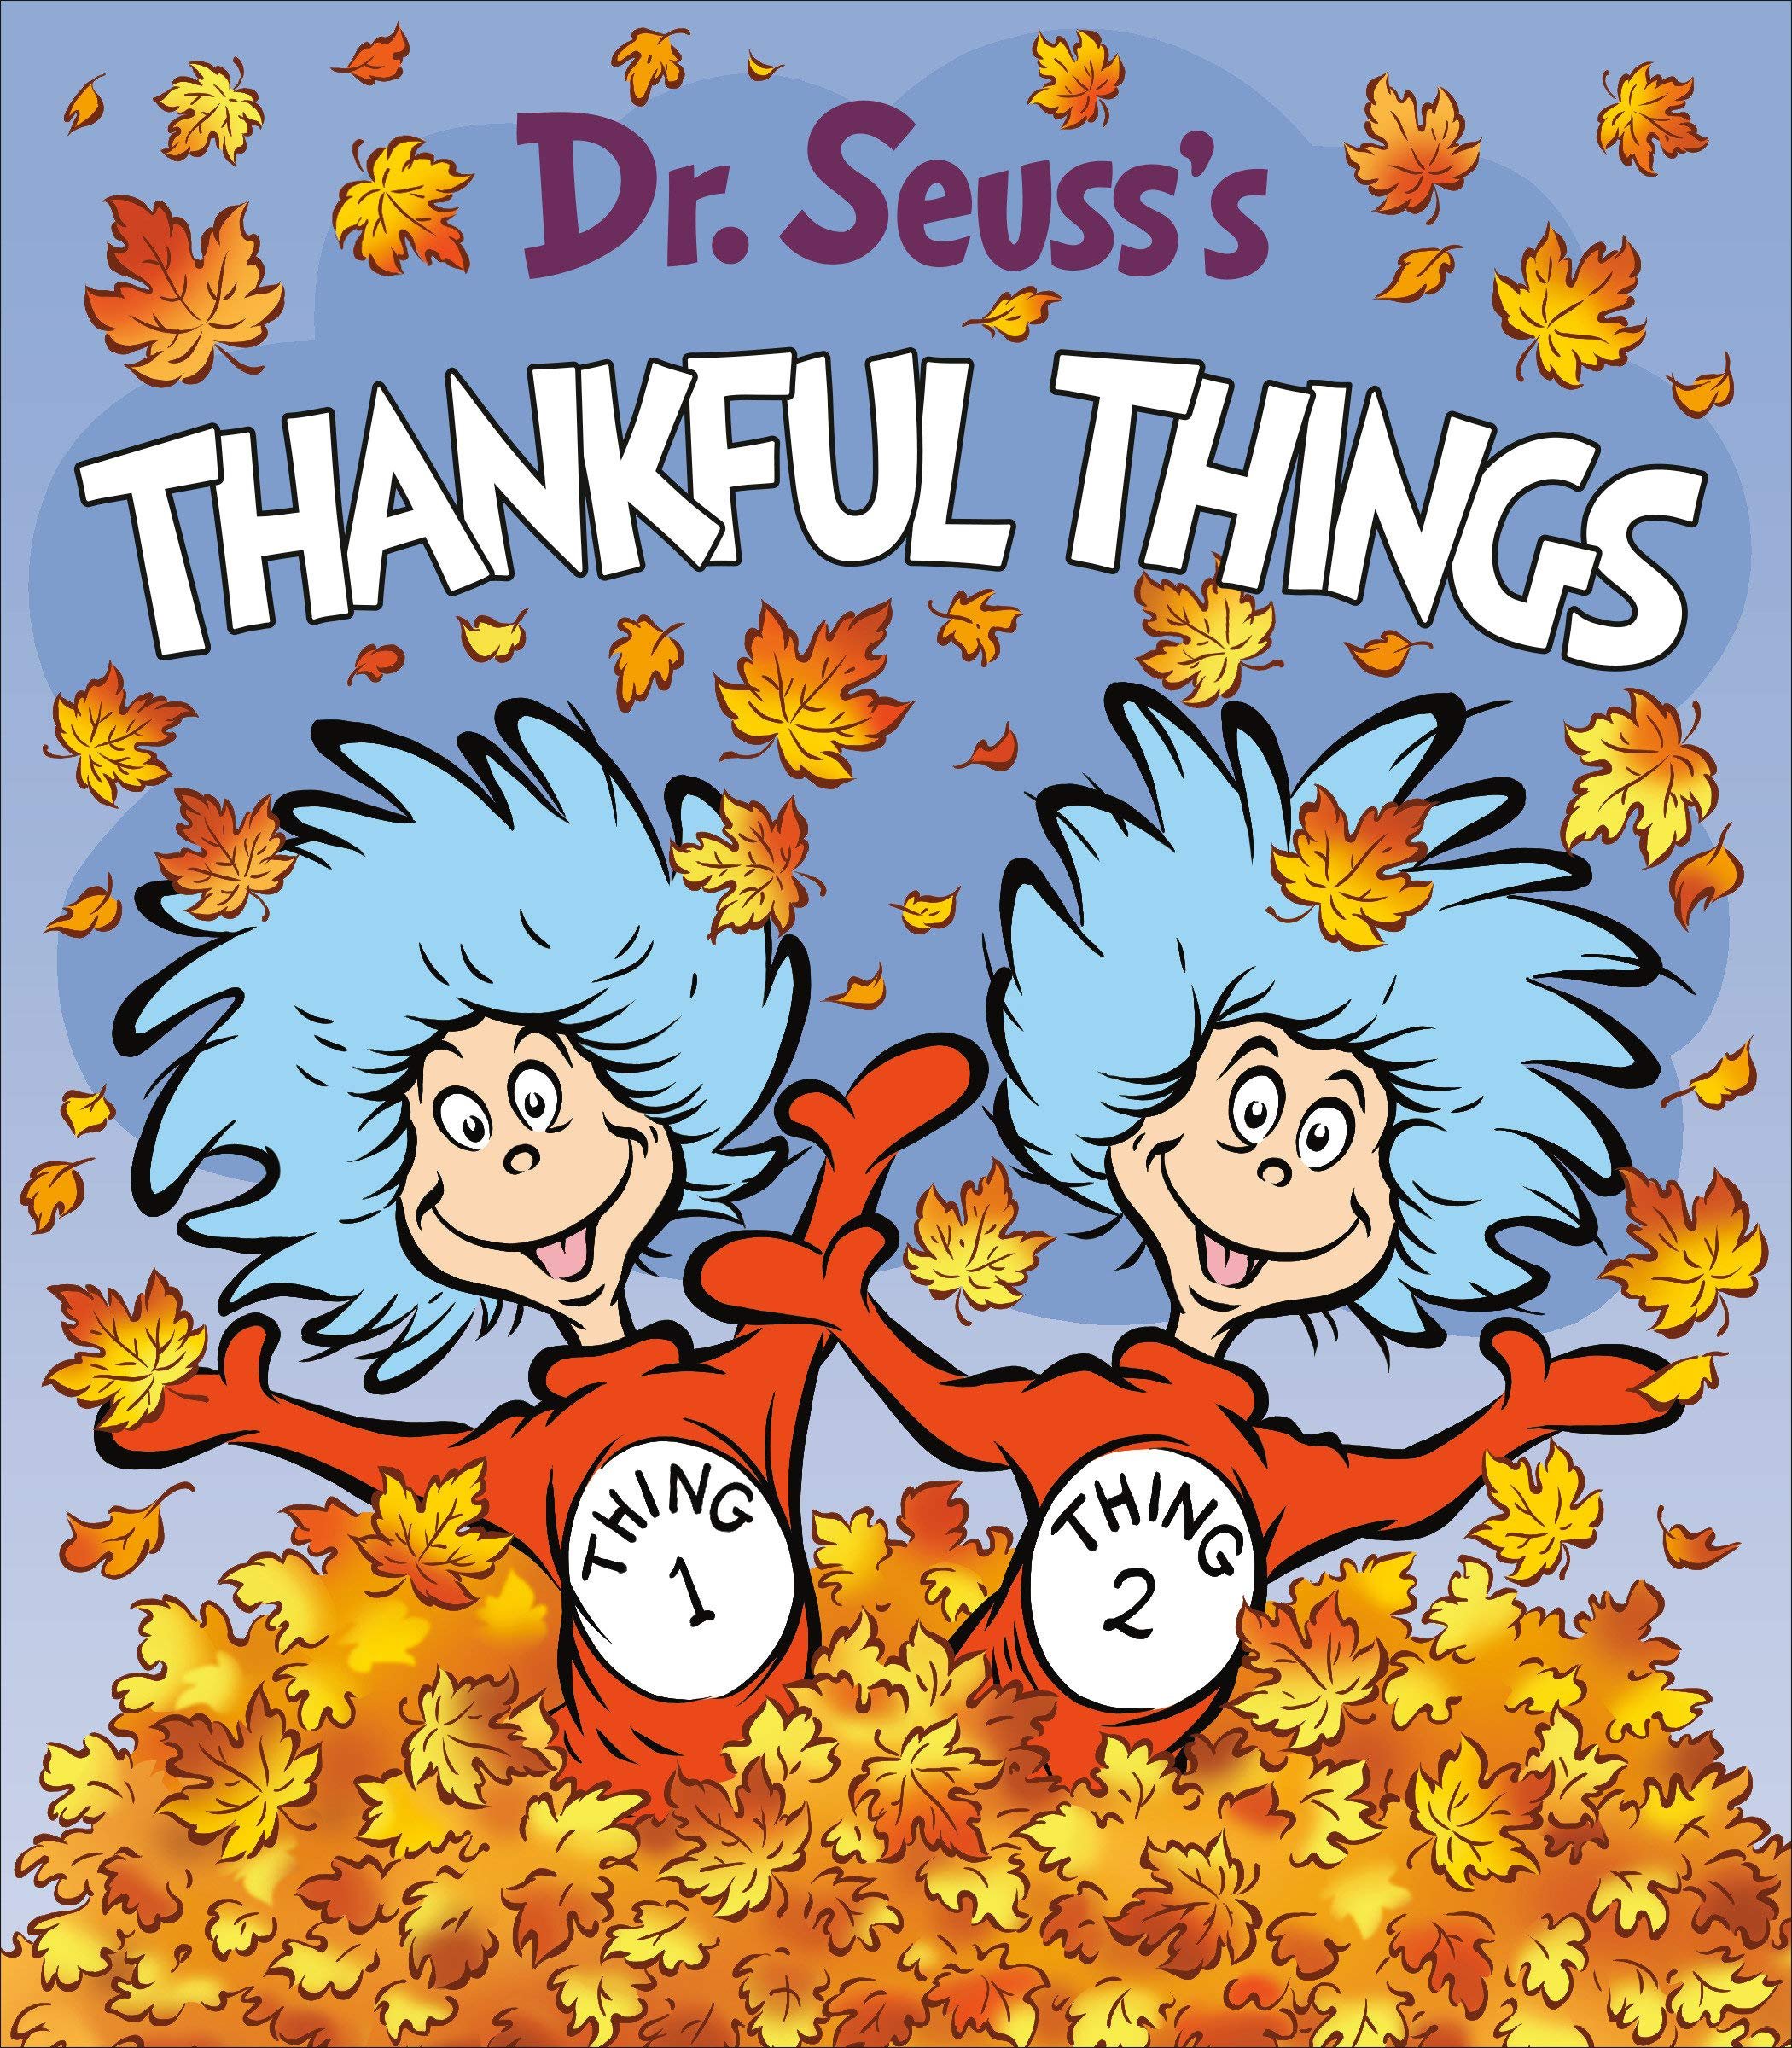 Thankful Things by Dr. Seuss